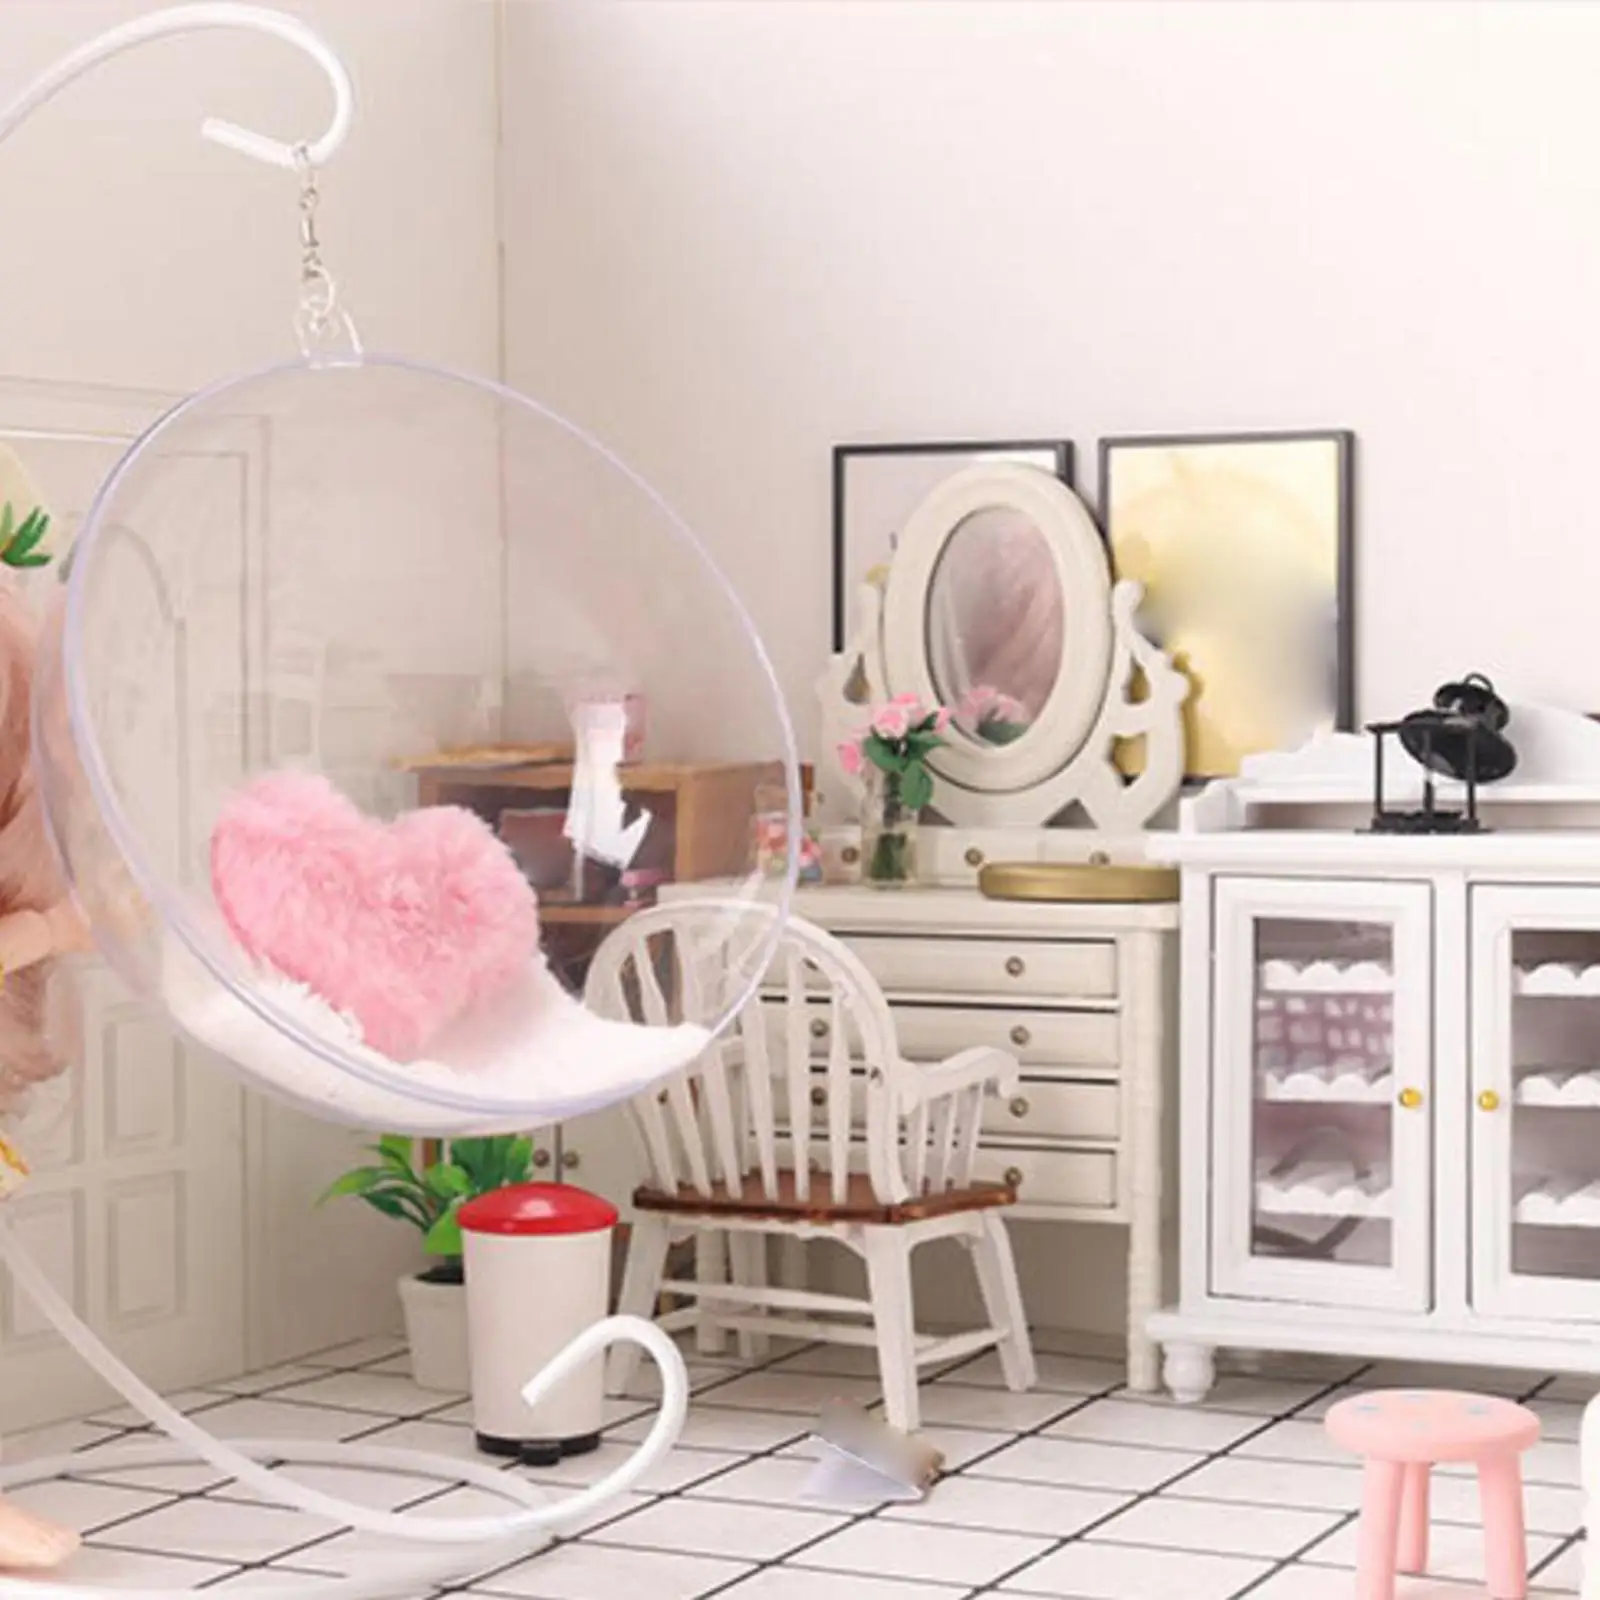 Miniature Swing Chair Simulation Model Display for Play House Toys Kids